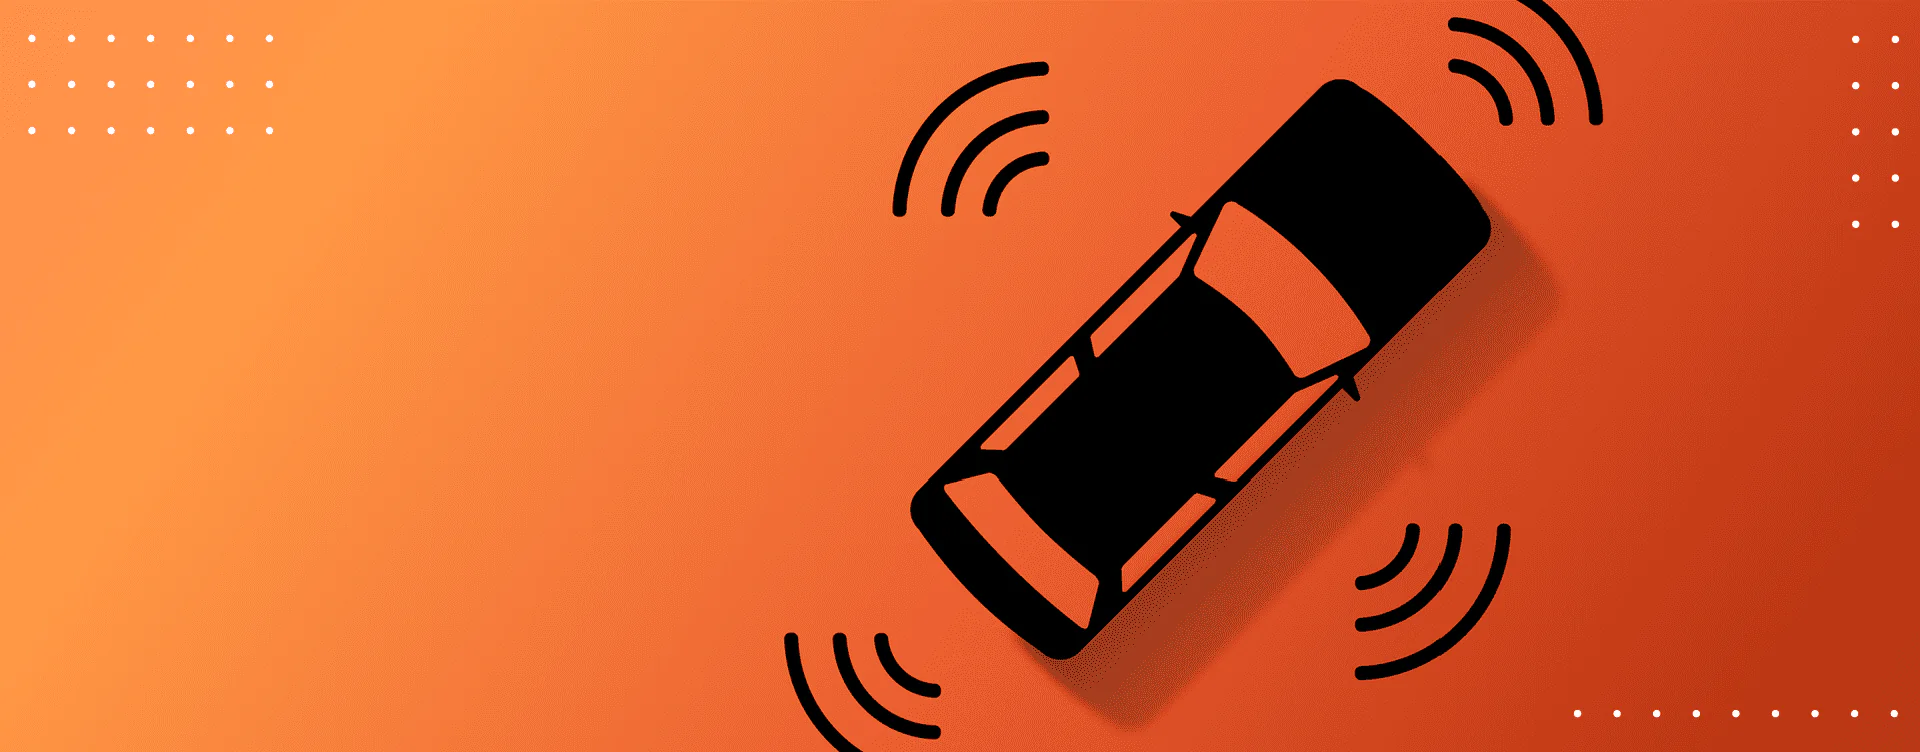 Internet of Things in the Automotive Industry: Solutions for Vehicles, Smart, and Connected Cars article image